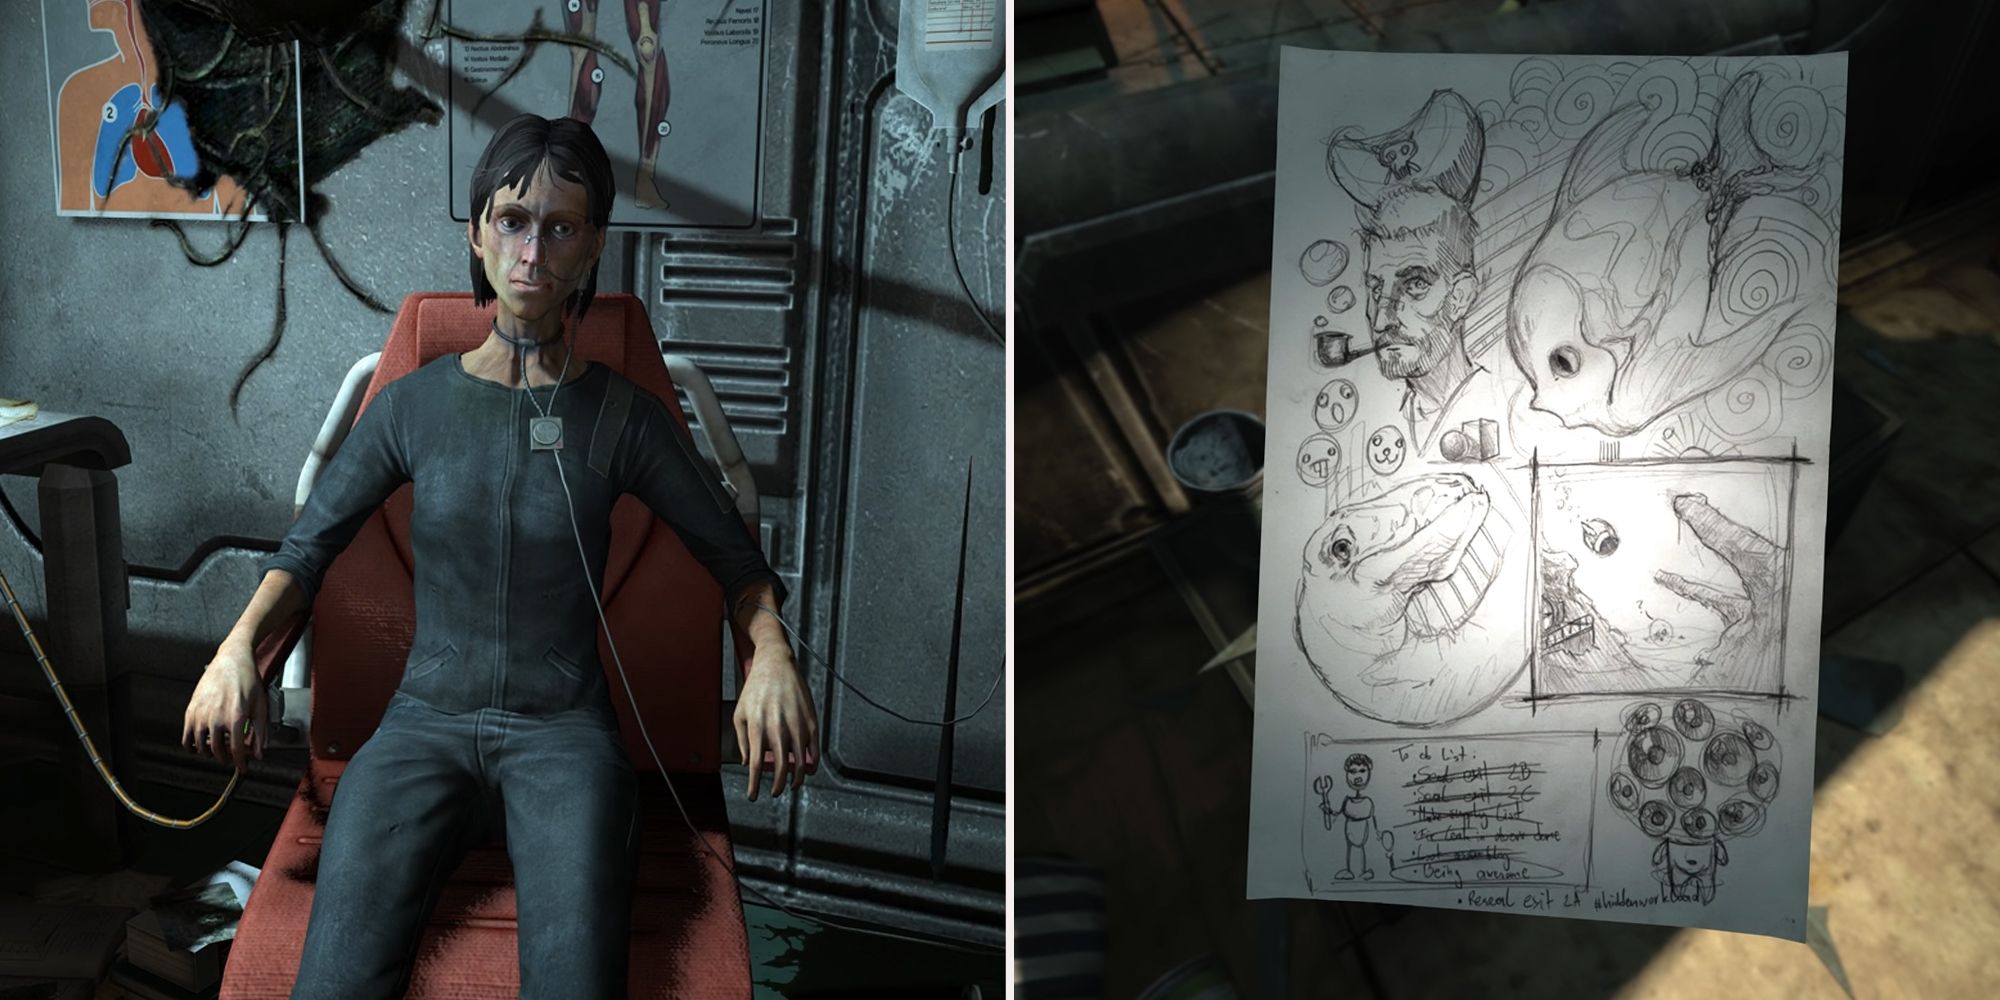 Soma split image. On the left, a character sat in a chair with tubes coming out of her nose. On the right are hand-drawn sketches on a white sheet of paper.